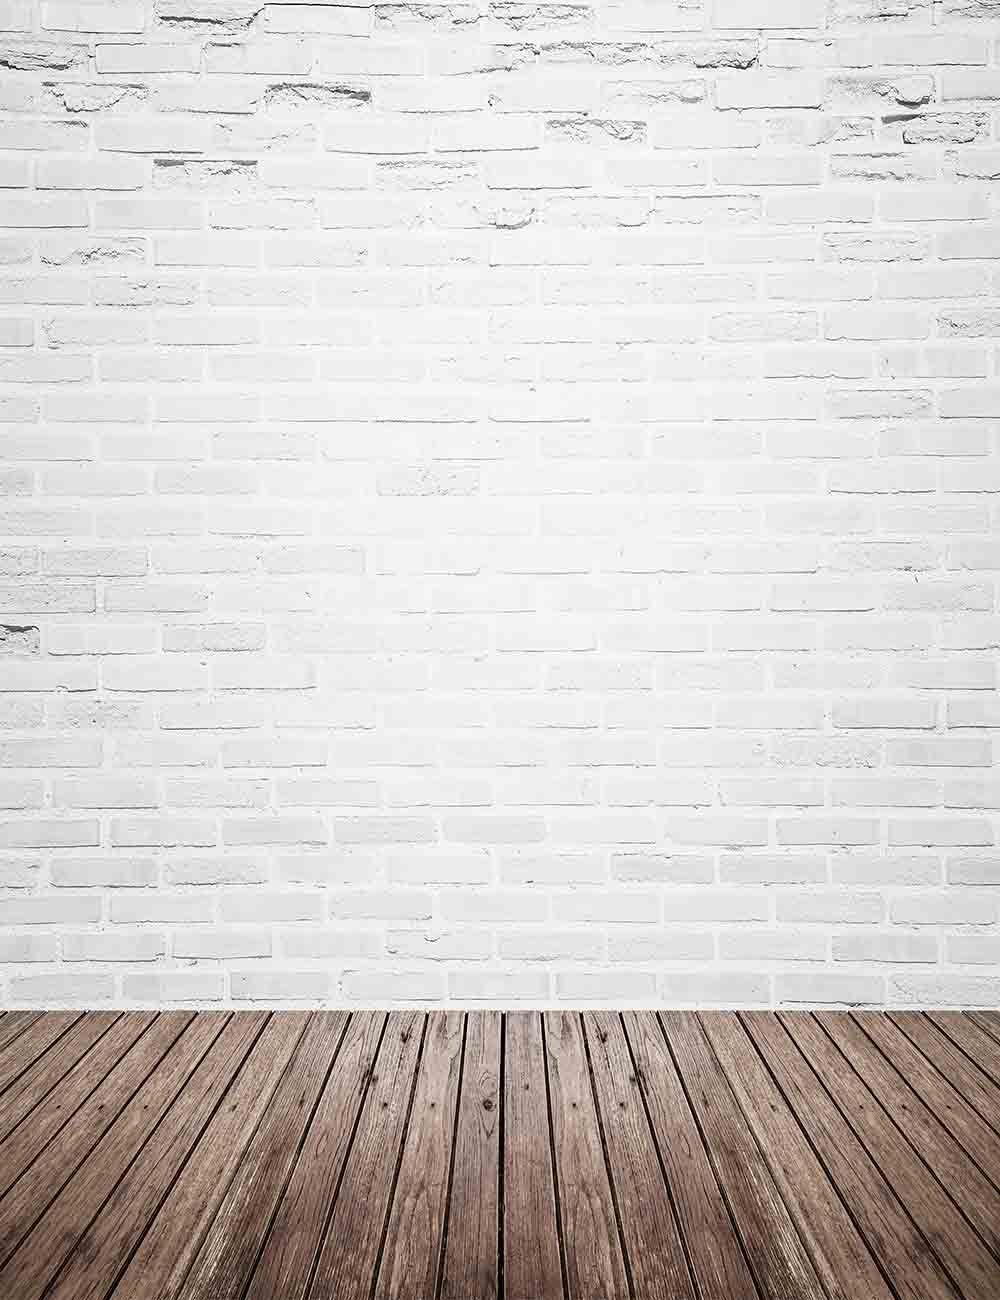 Retro White  Brick  Wall  With Wood Floor  Mat Texture 